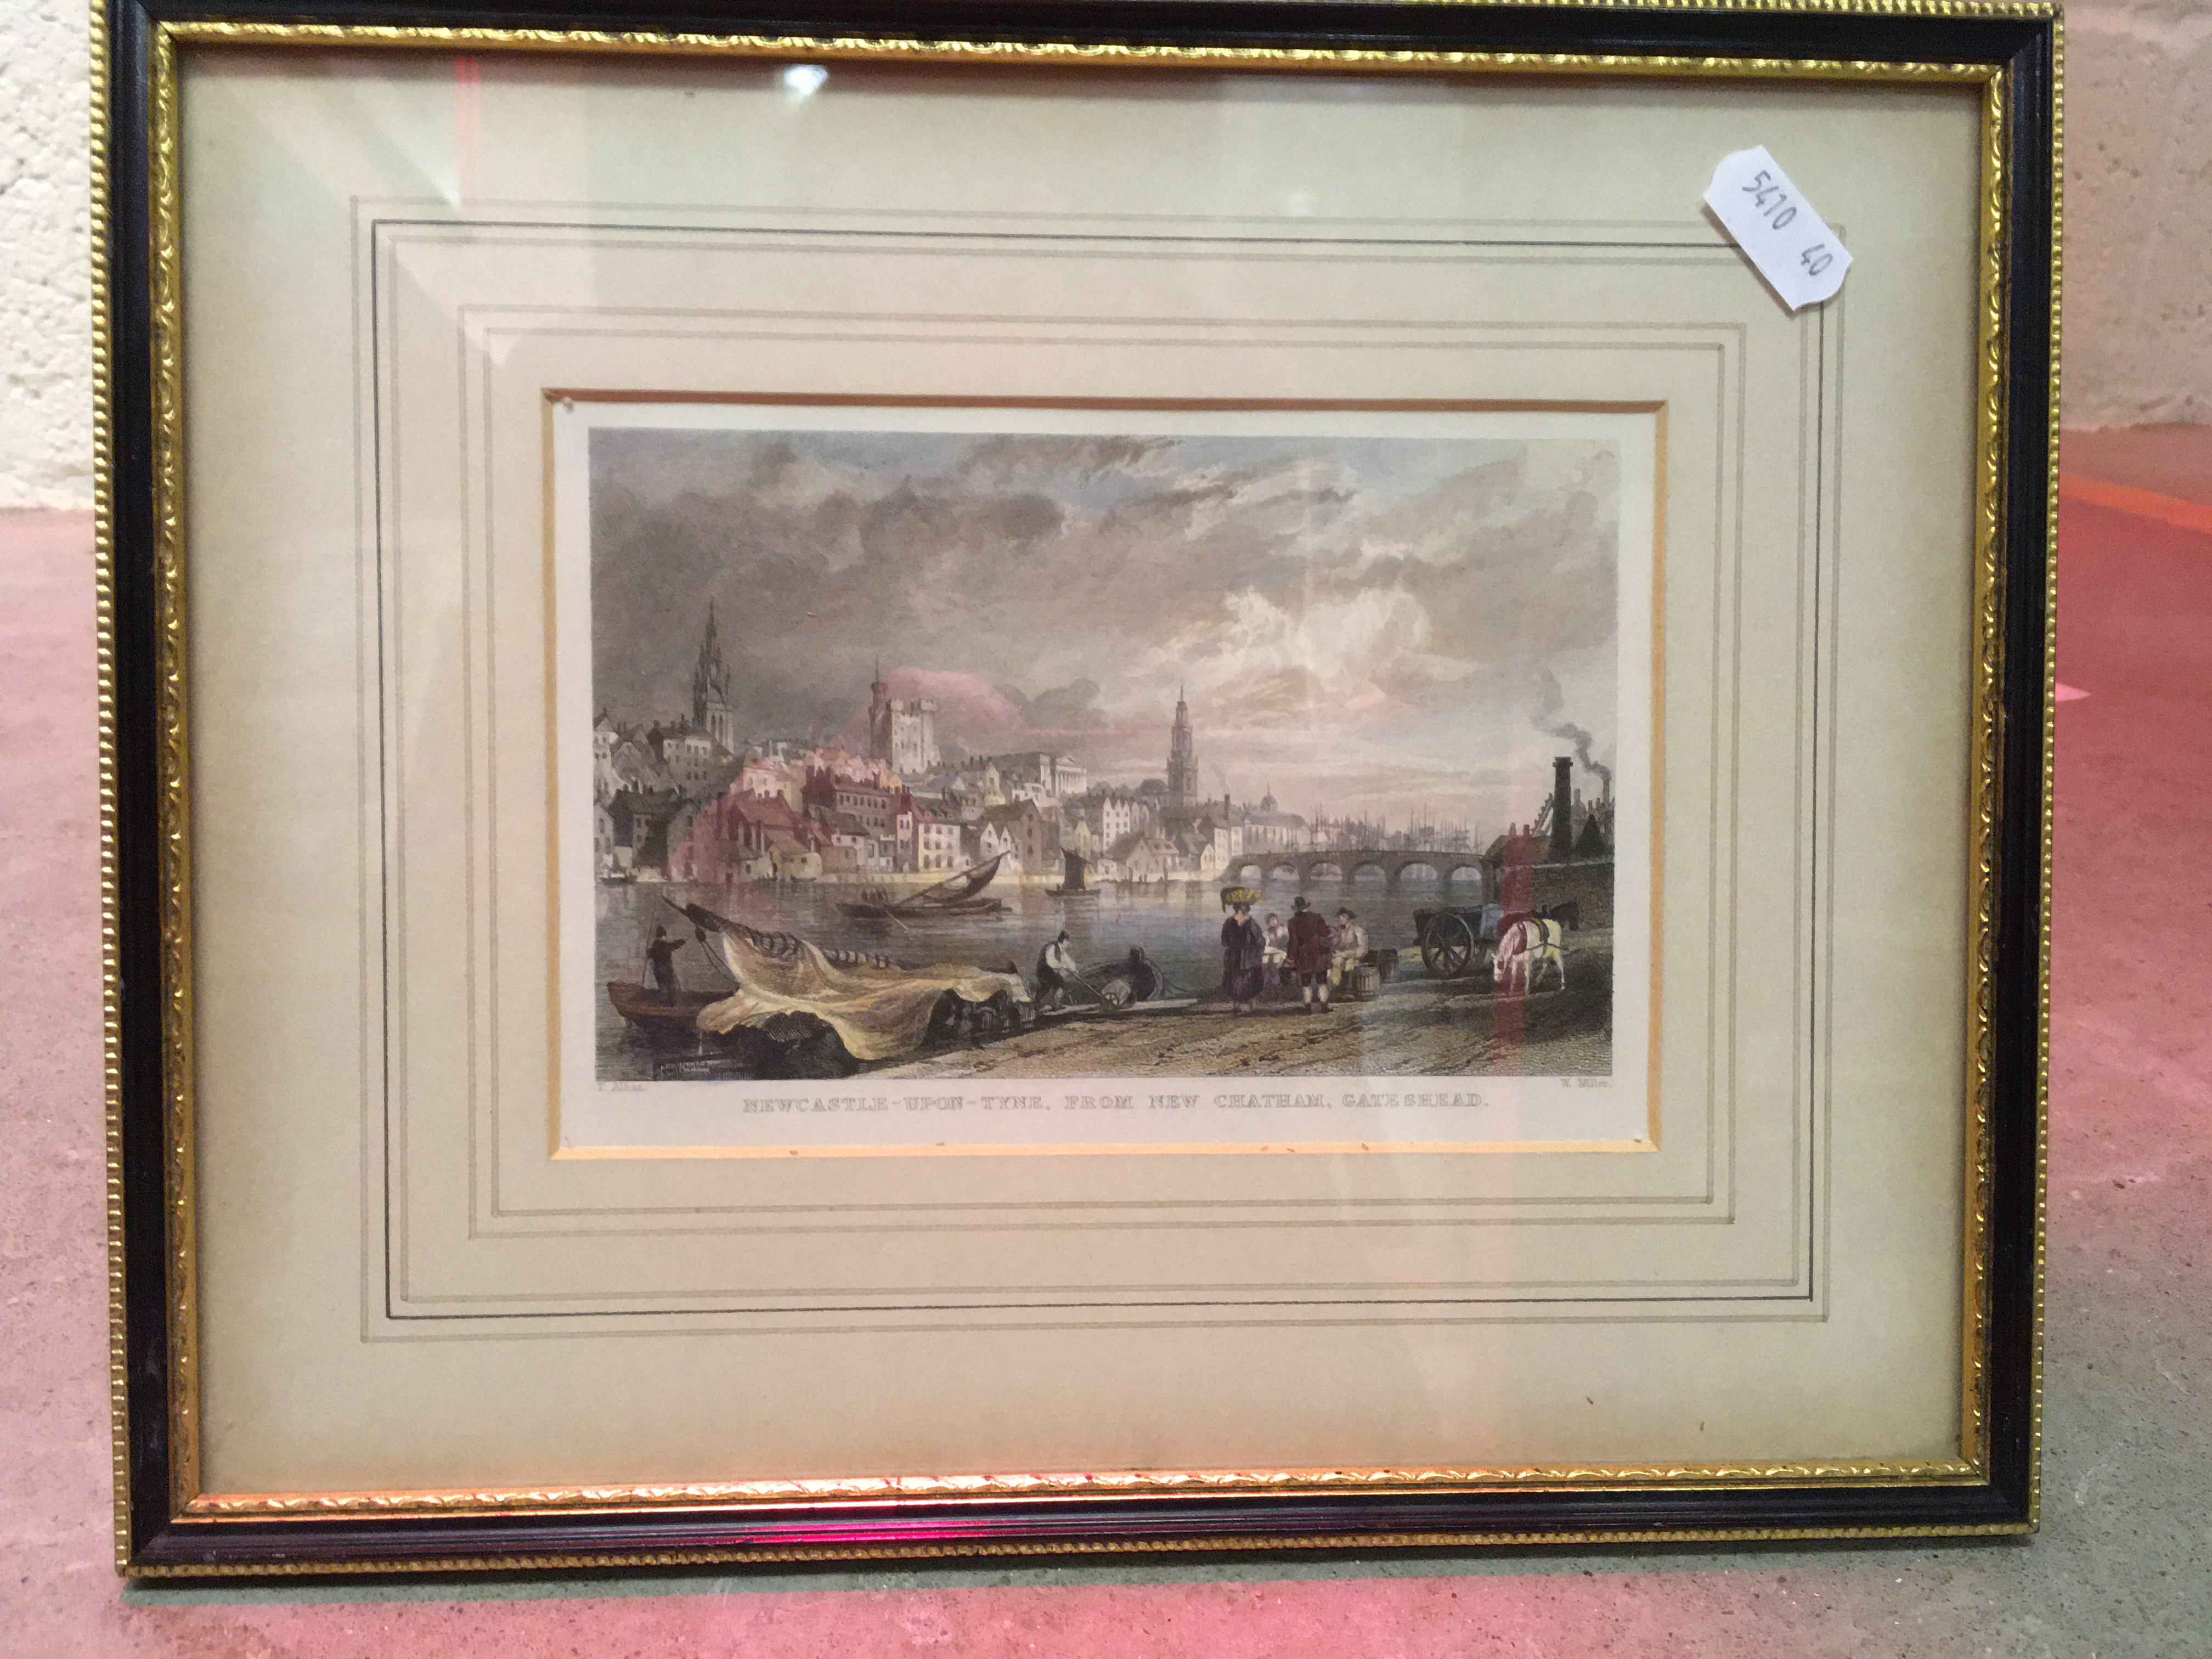 J A TOFT "River scene with bridge in background, - Image 23 of 31